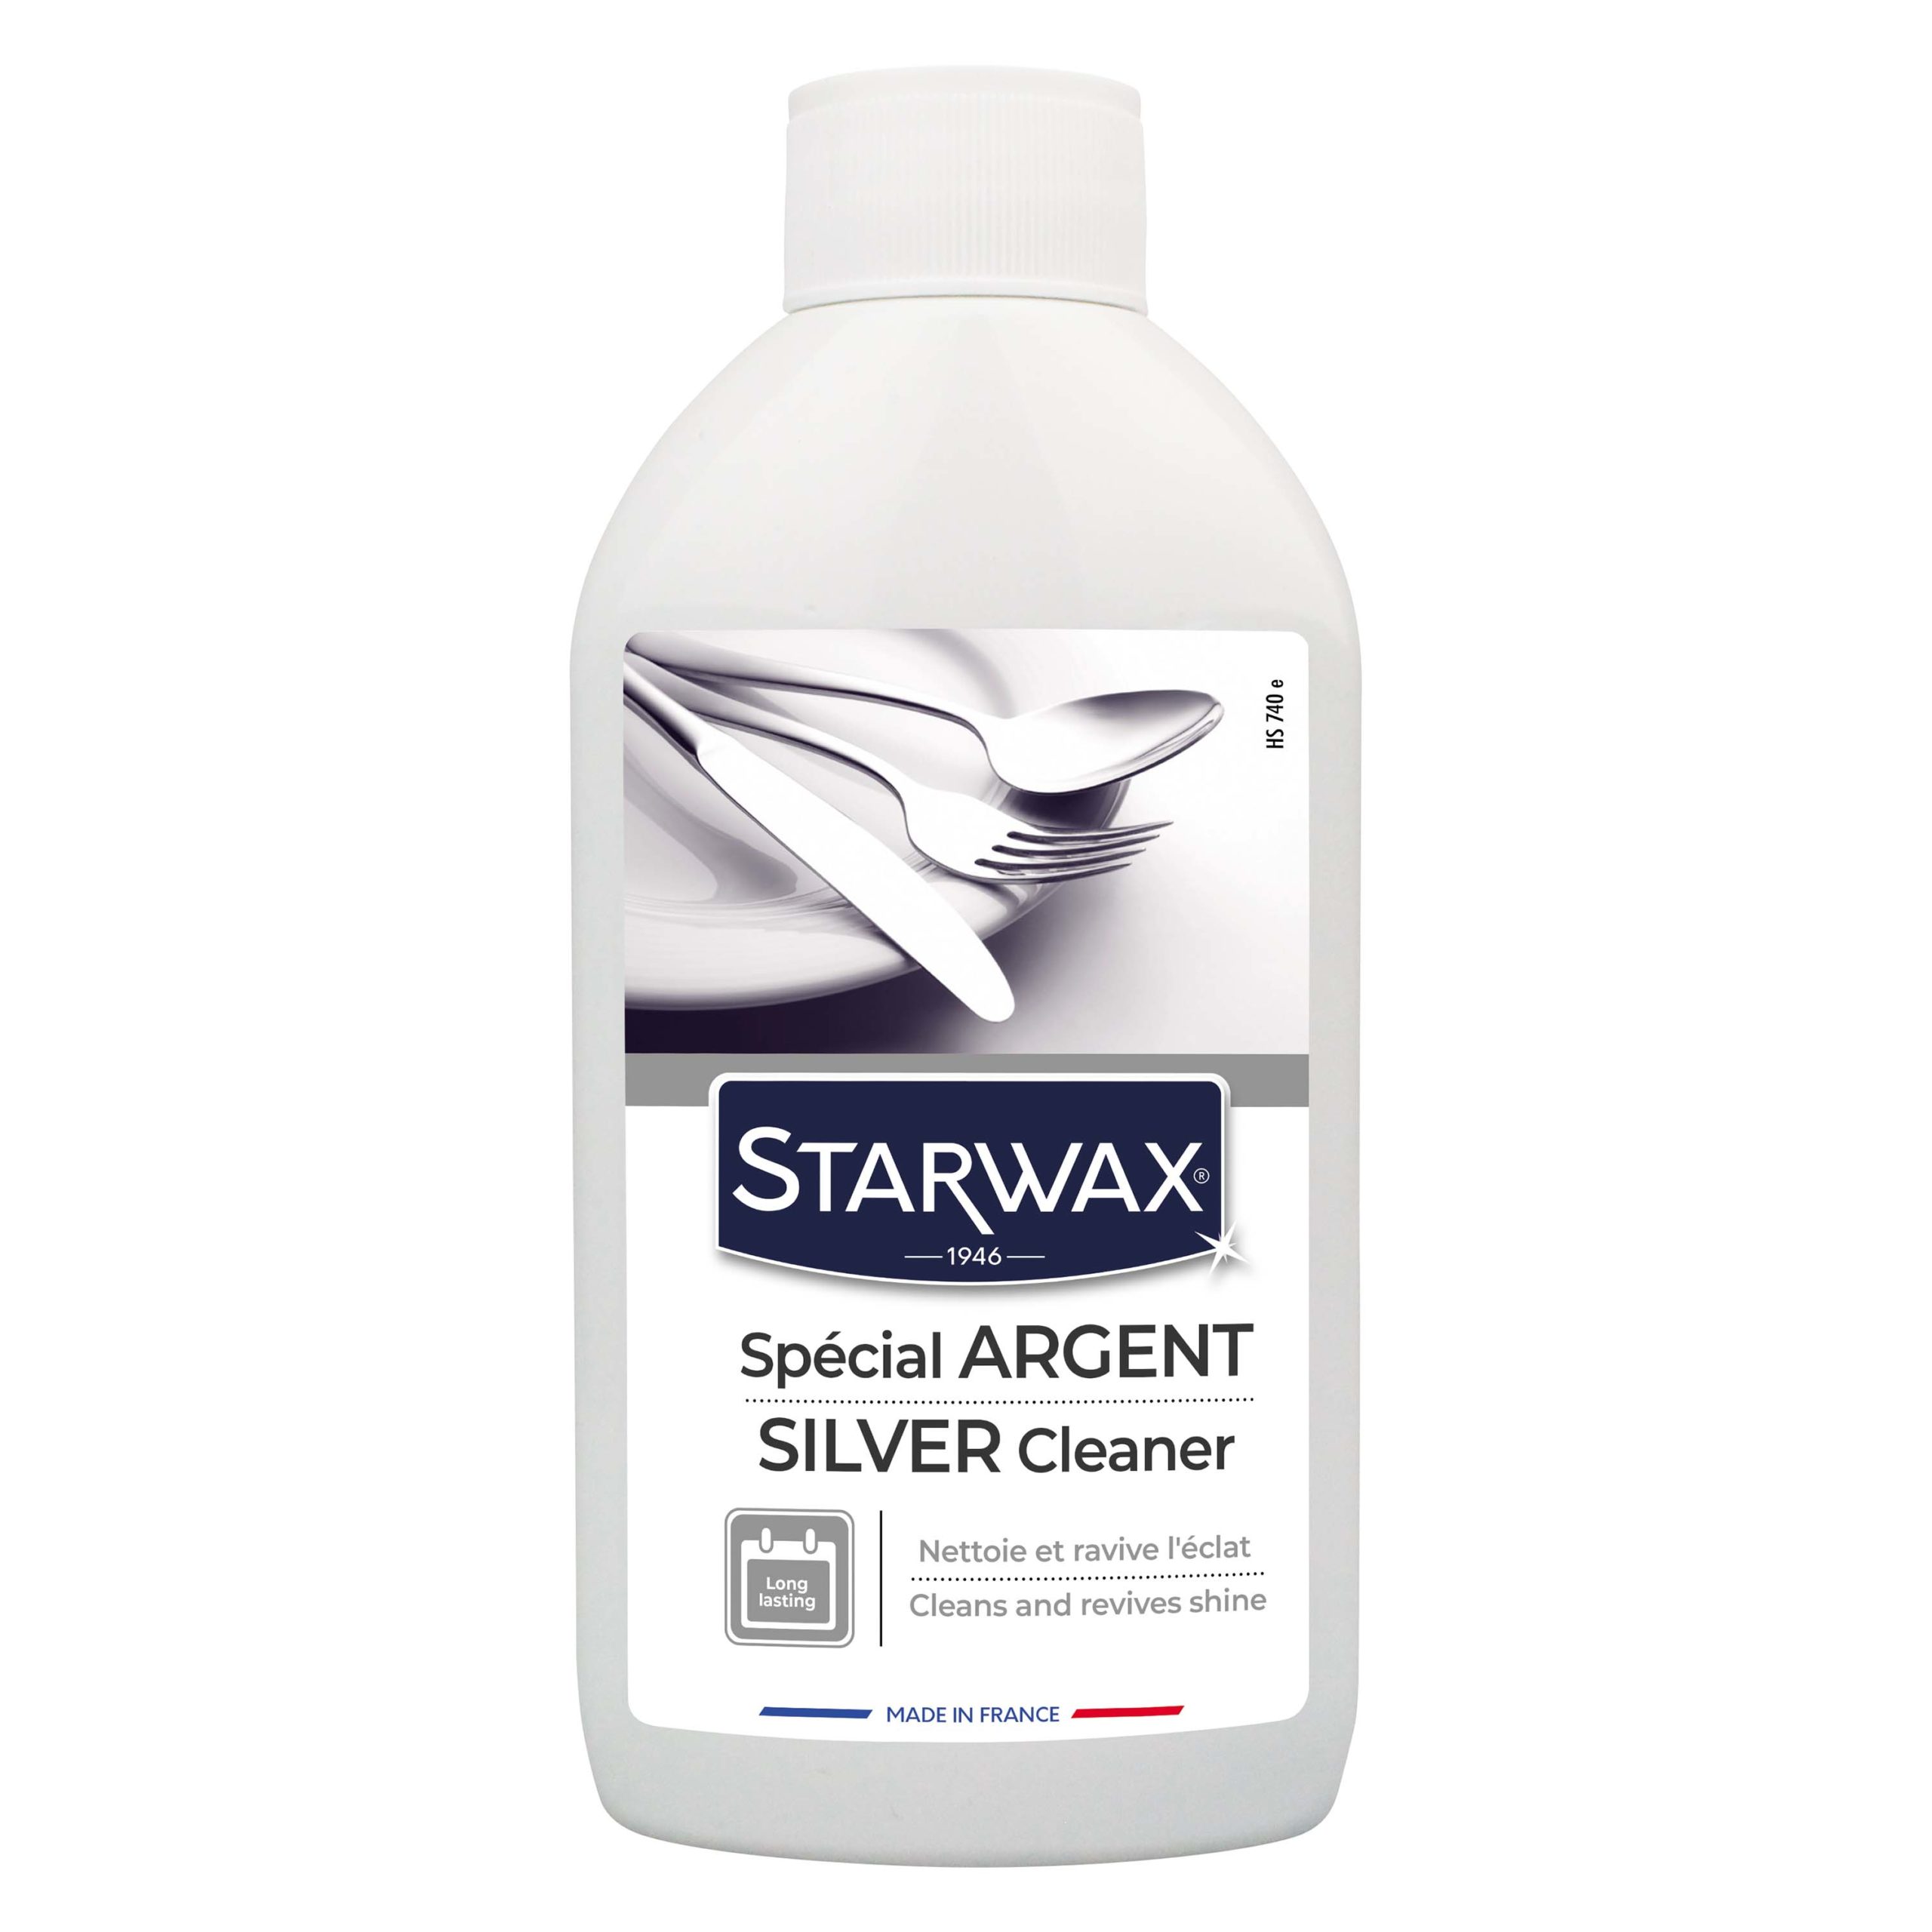 Silver cleaner  Starwax, cleanliness of the house